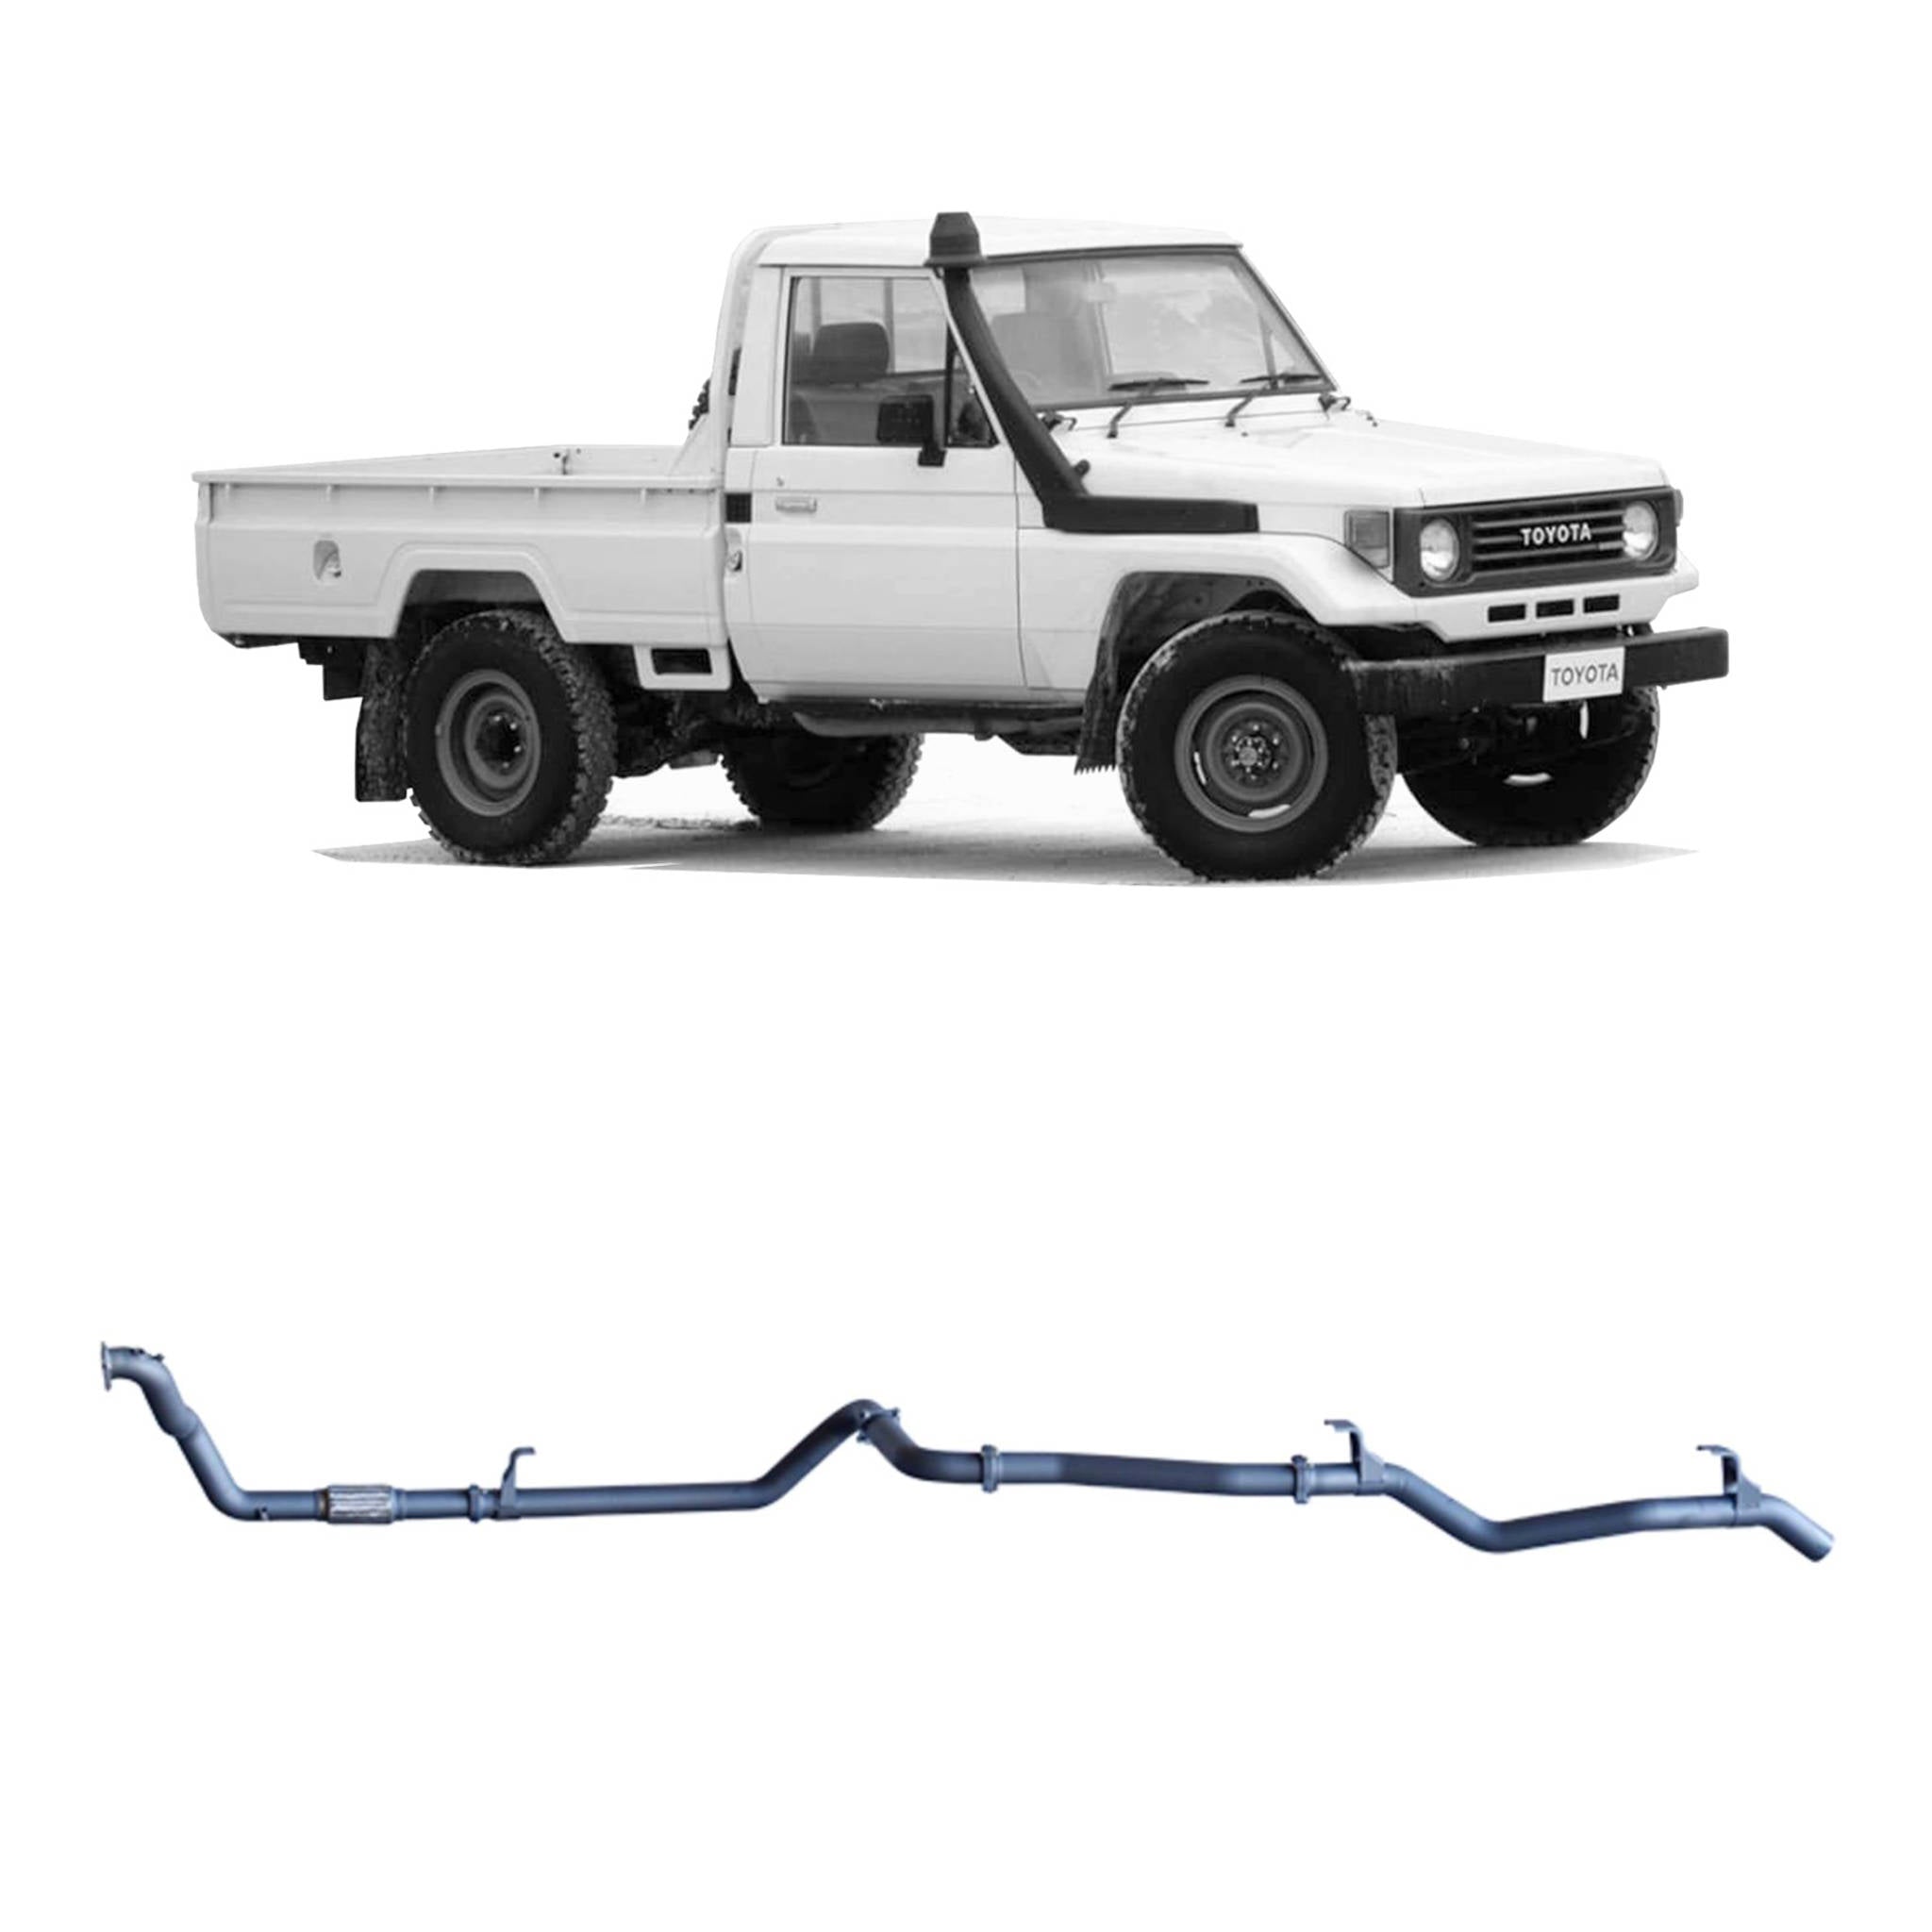 Redback Extreme Duty Exhaust to suit Toyota Landcruiser 78 Series (01/1990 - 01/2007), Toyota Landcruiser 75 Series (03/1990 - 11/1999)